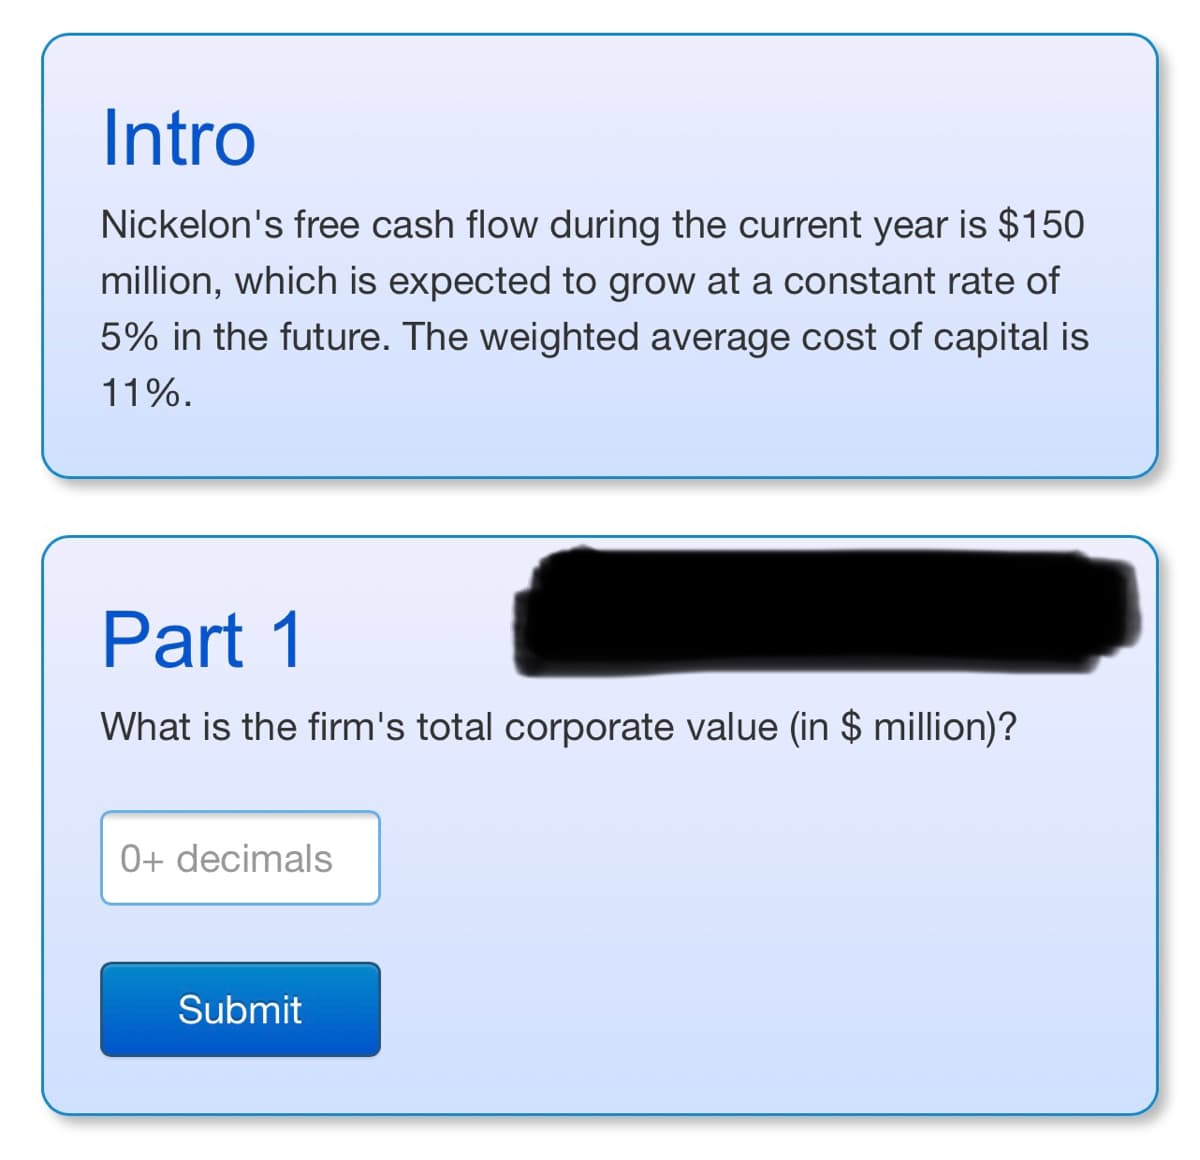 Intro
Nickelon's free cash flow during the current year is $150
million, which is expected to grow at a constant rate of
5% in the future. The weighted average cost of capital is
11%.
Part 1
What is the firm's total corporate value (in $ million)?
0+ decimals
Submit